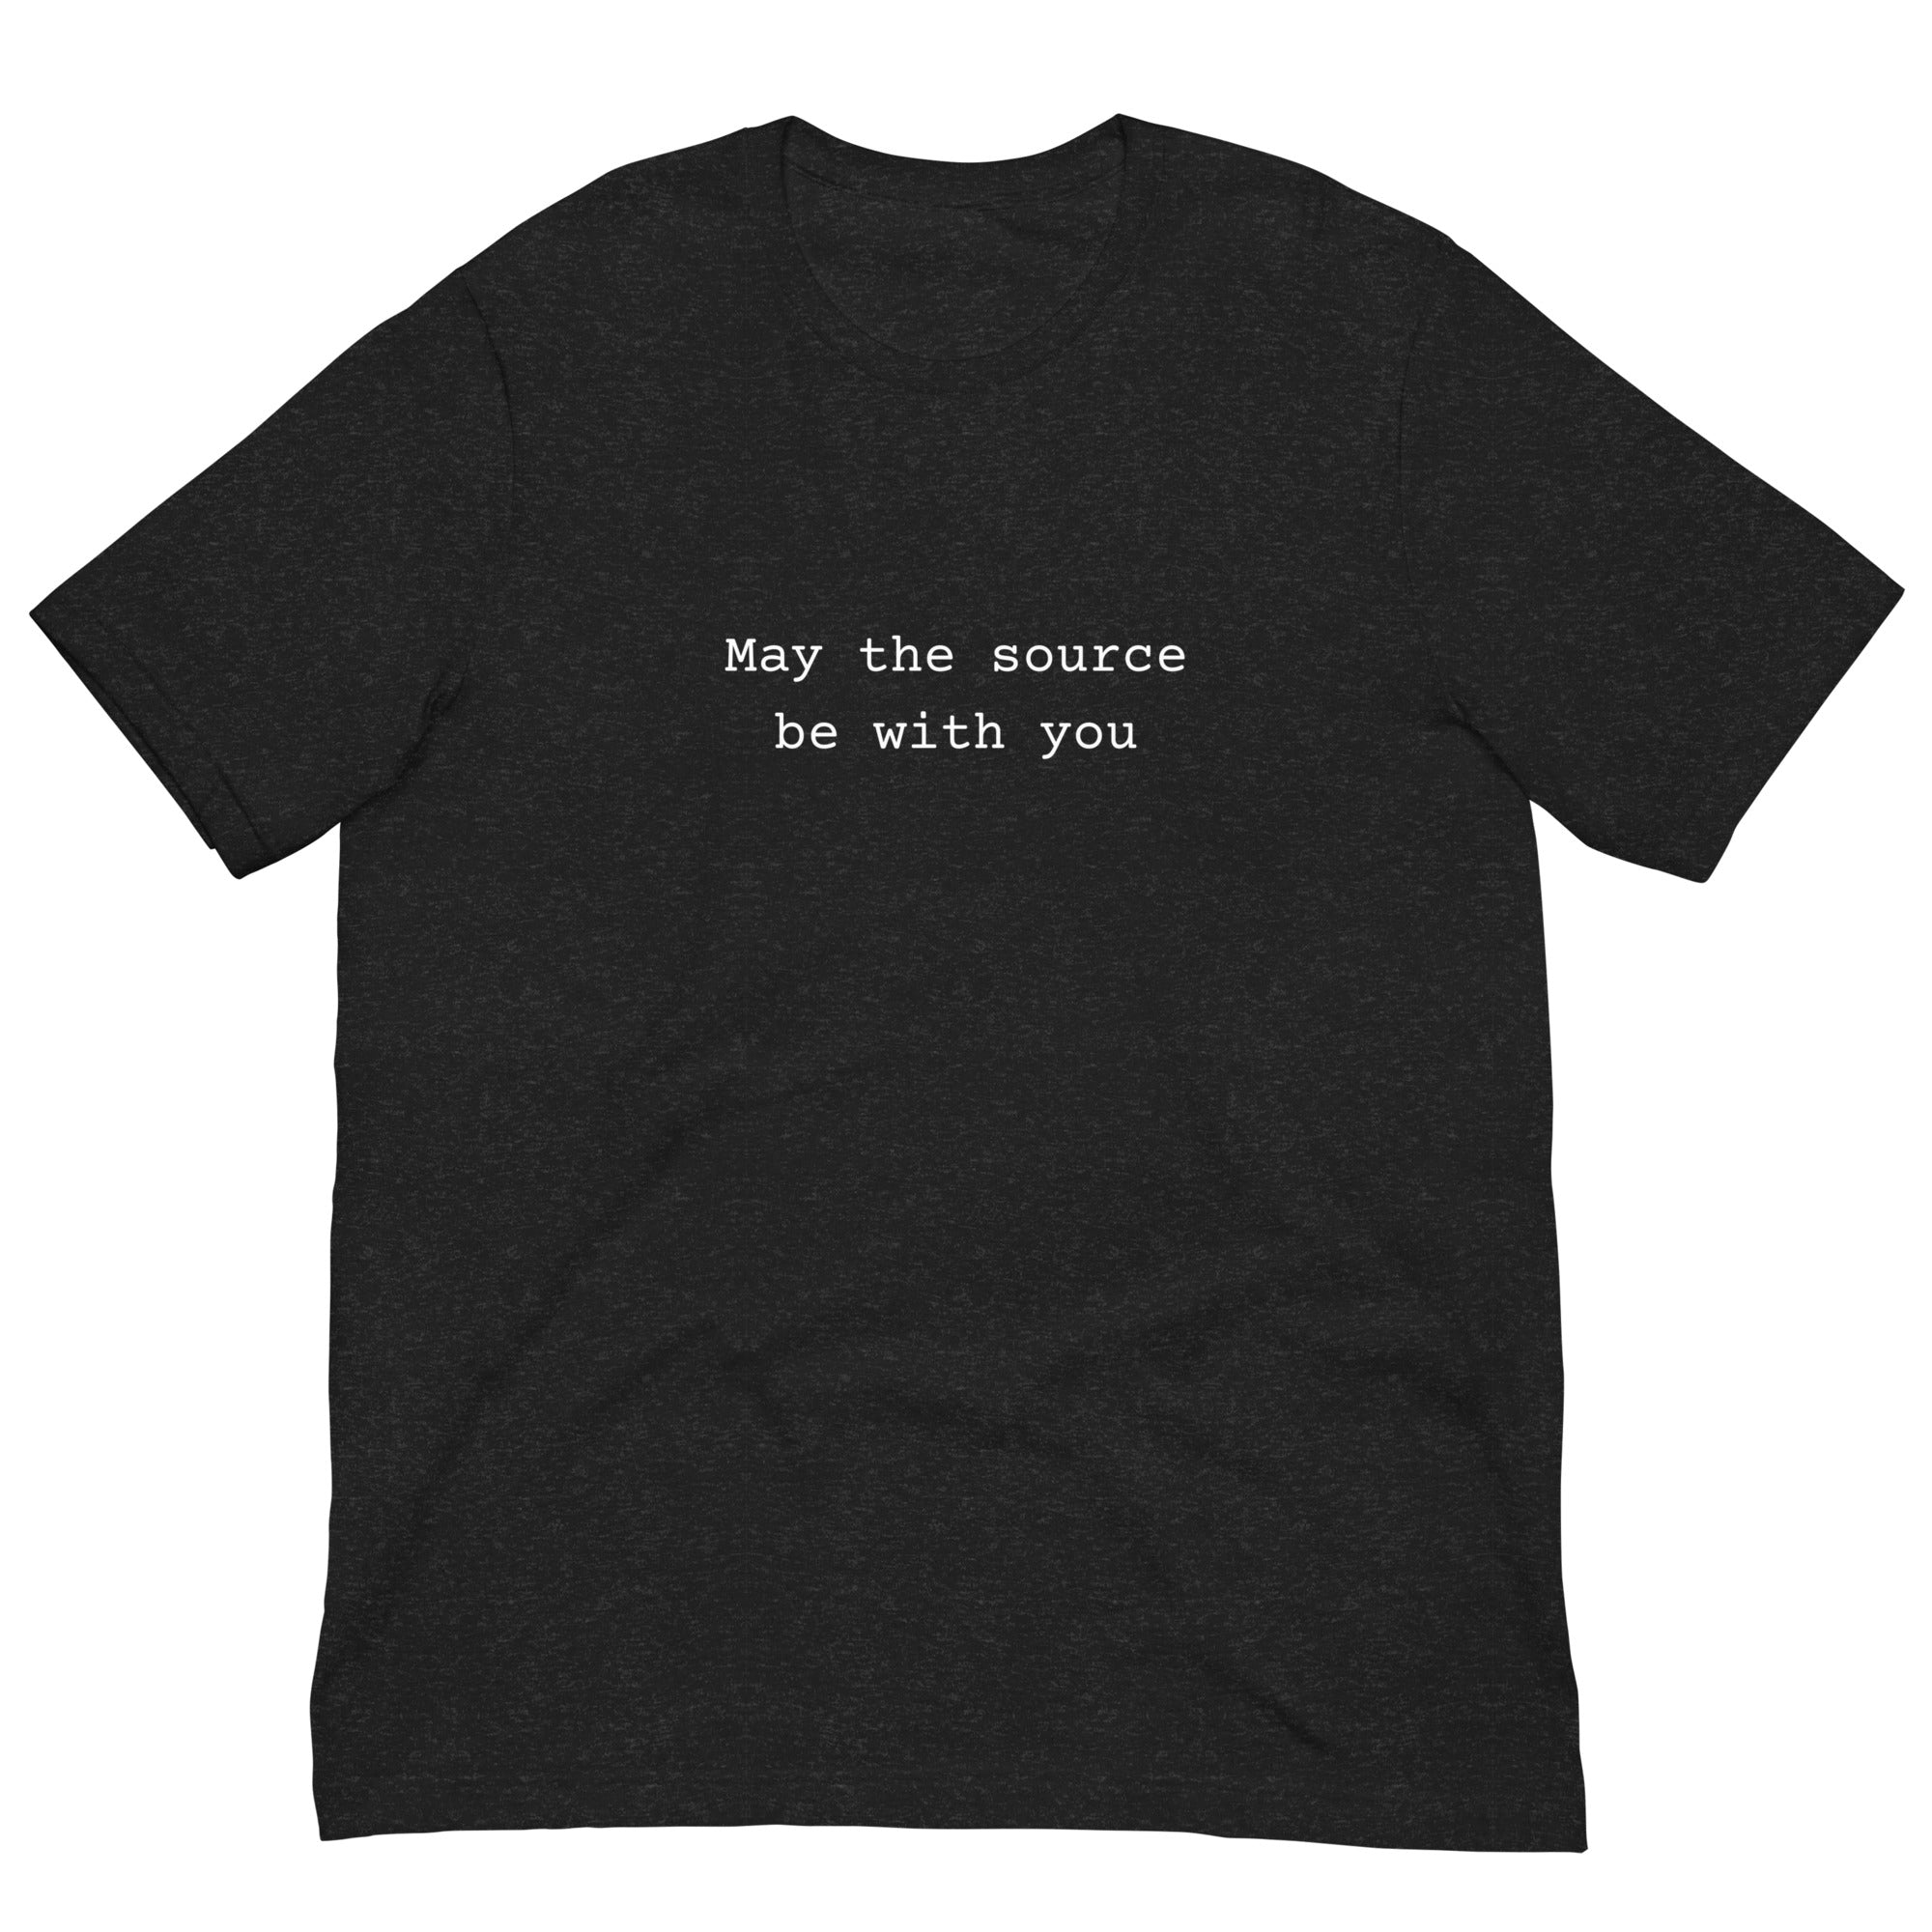 May the Source Be With You - Funny Programmer T-Shirt - Geek Humor - PennyJellies